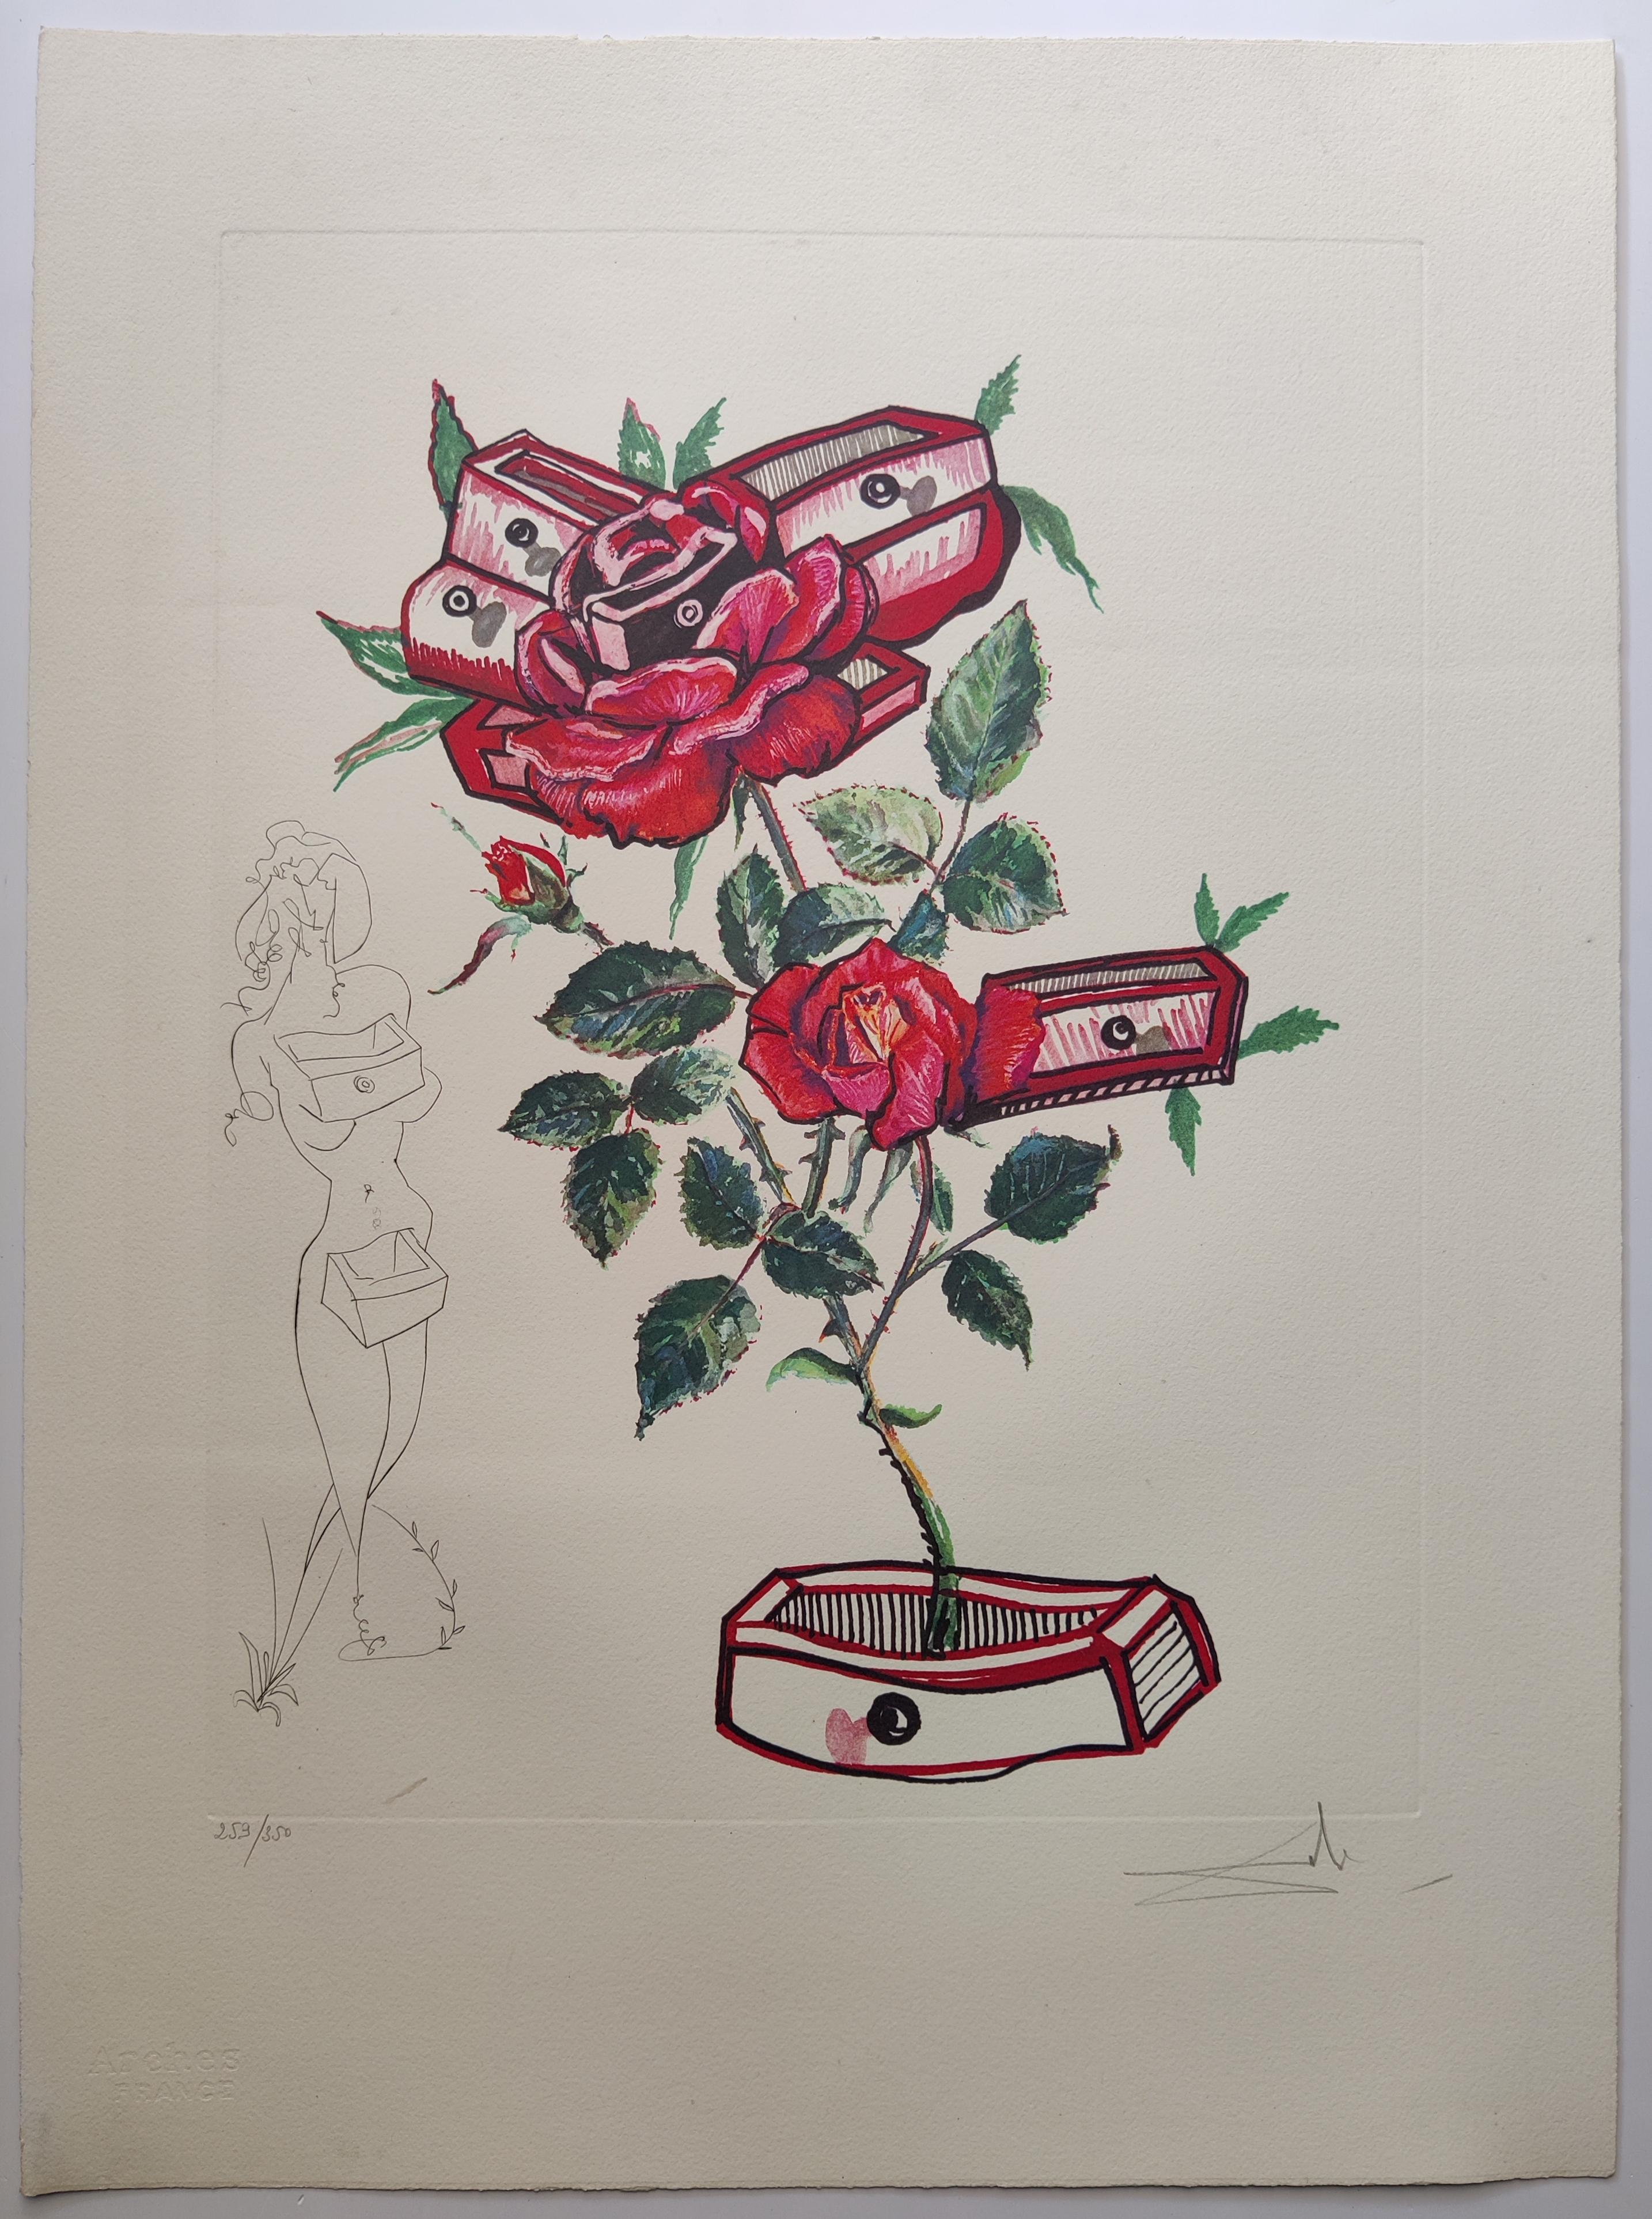 Salvador Dalí­ 
Rose + Drawers from Surrealist Flowers, Florals 1972
Hand-signed in pencil
Edition 259/350
Image size: 55 x 42 cm
Sheet size: 75 x 55  cm
Published by Editions Graphiques Internationales, Paris, on heavy Arches paper, with full